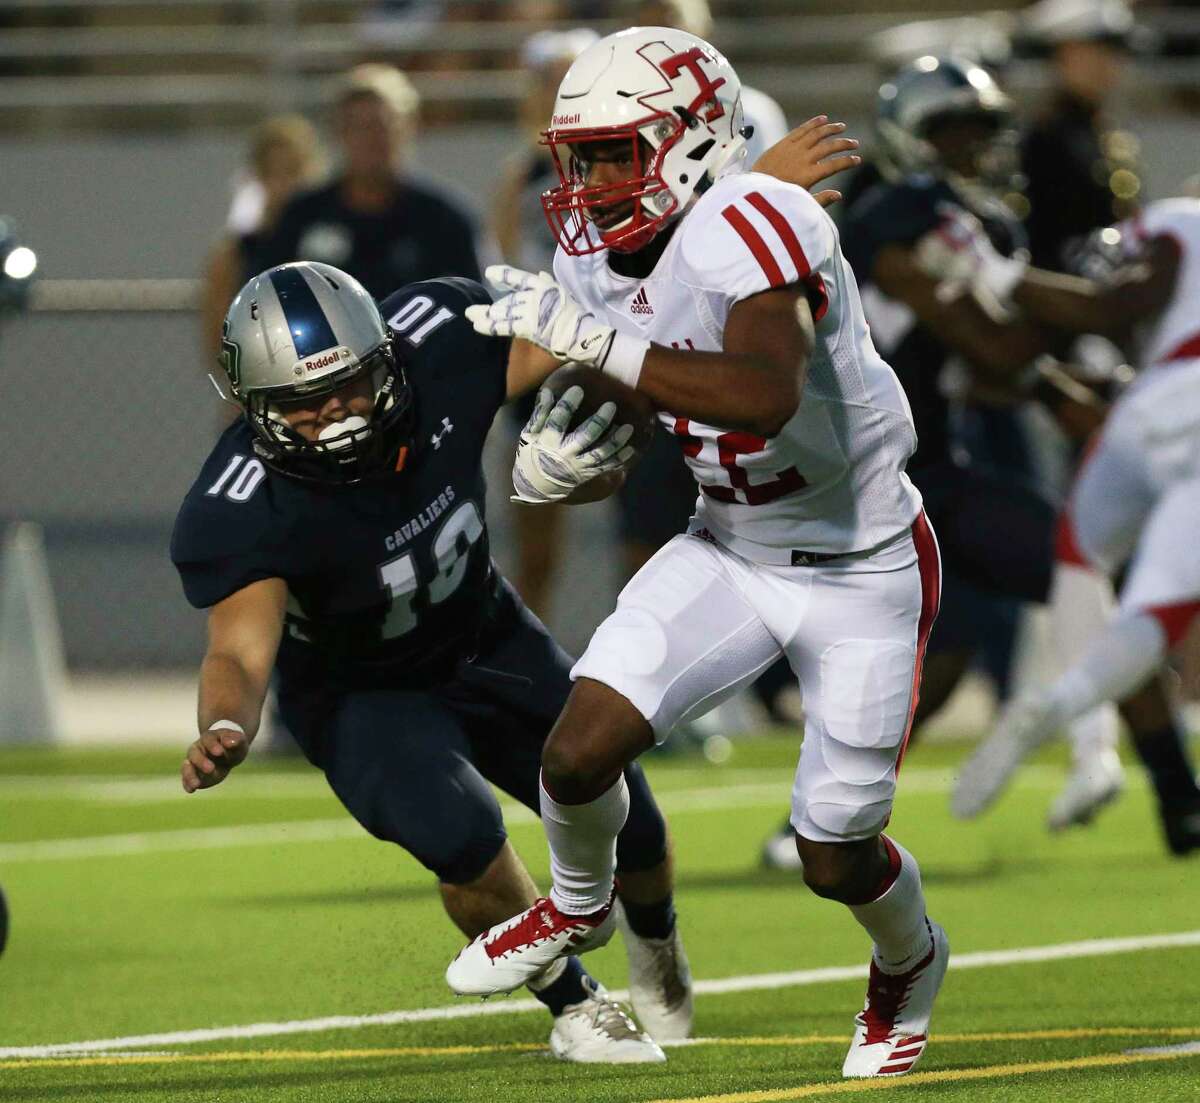 Tomball's running back Ja'Kobi Holland (22) passes College Park's linebacker Haden Stark (1) during the first half of the game at the Woodforest Bank Stadium Friday, Sept. 8, 2017, in The Woodlands. ( Yi-Chin Lee / Houston Chronicle )